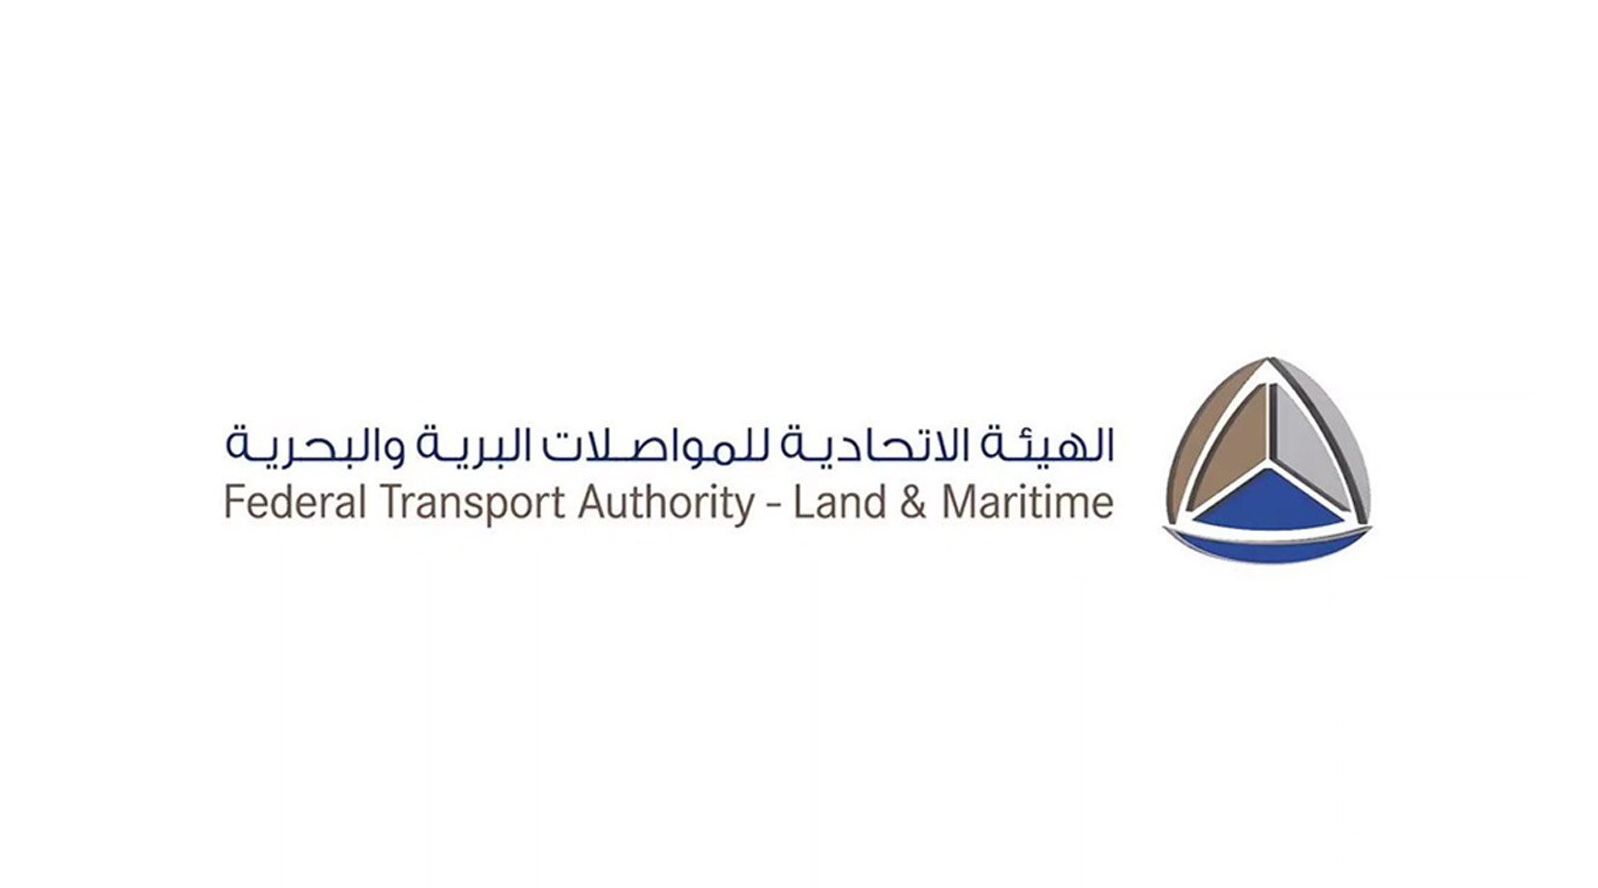 Federal Transport Authority Calls For Compliance With Official Guidelines